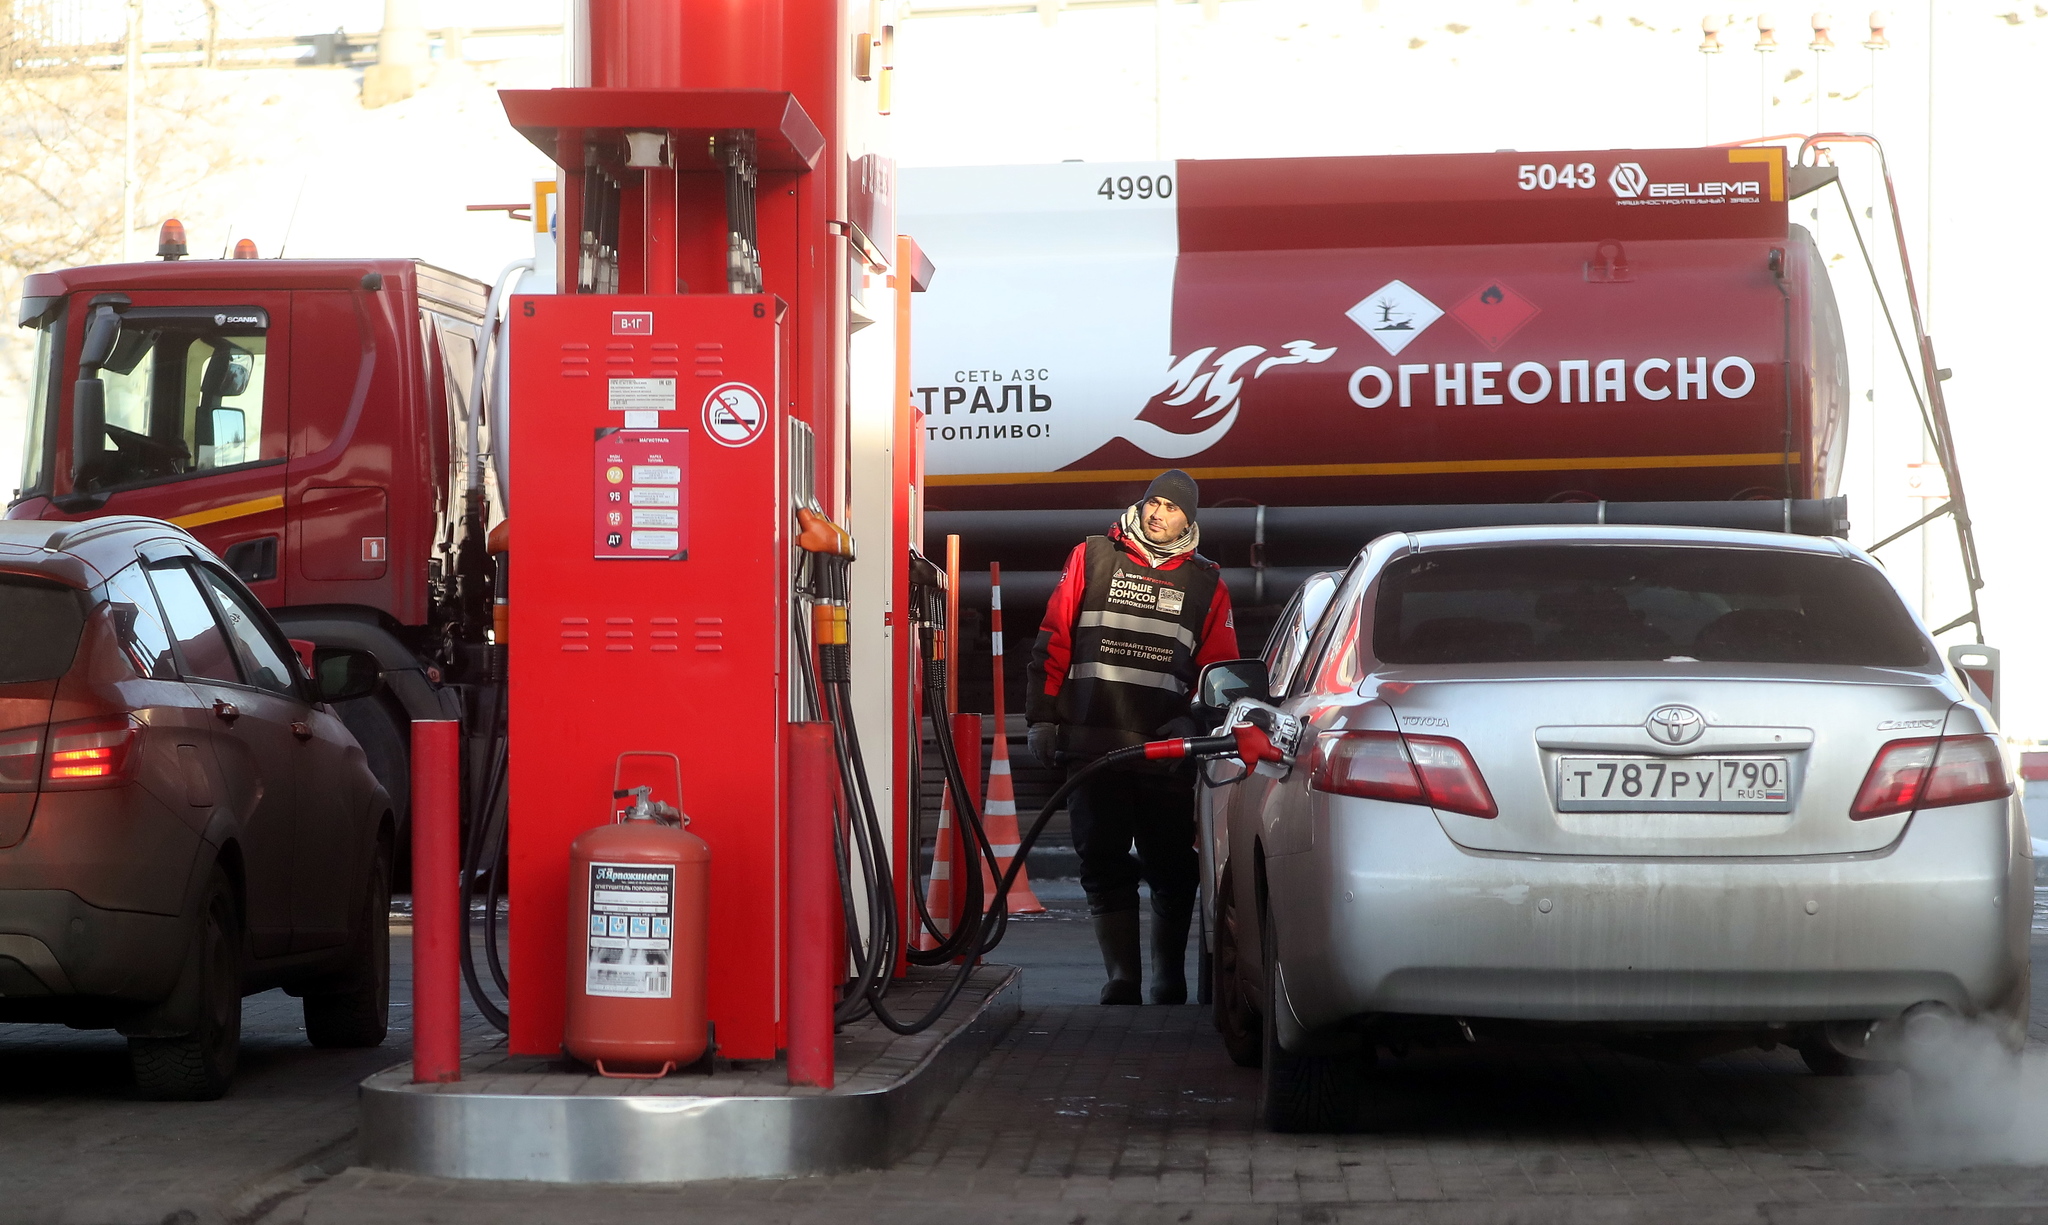 A gas station employee in Russia